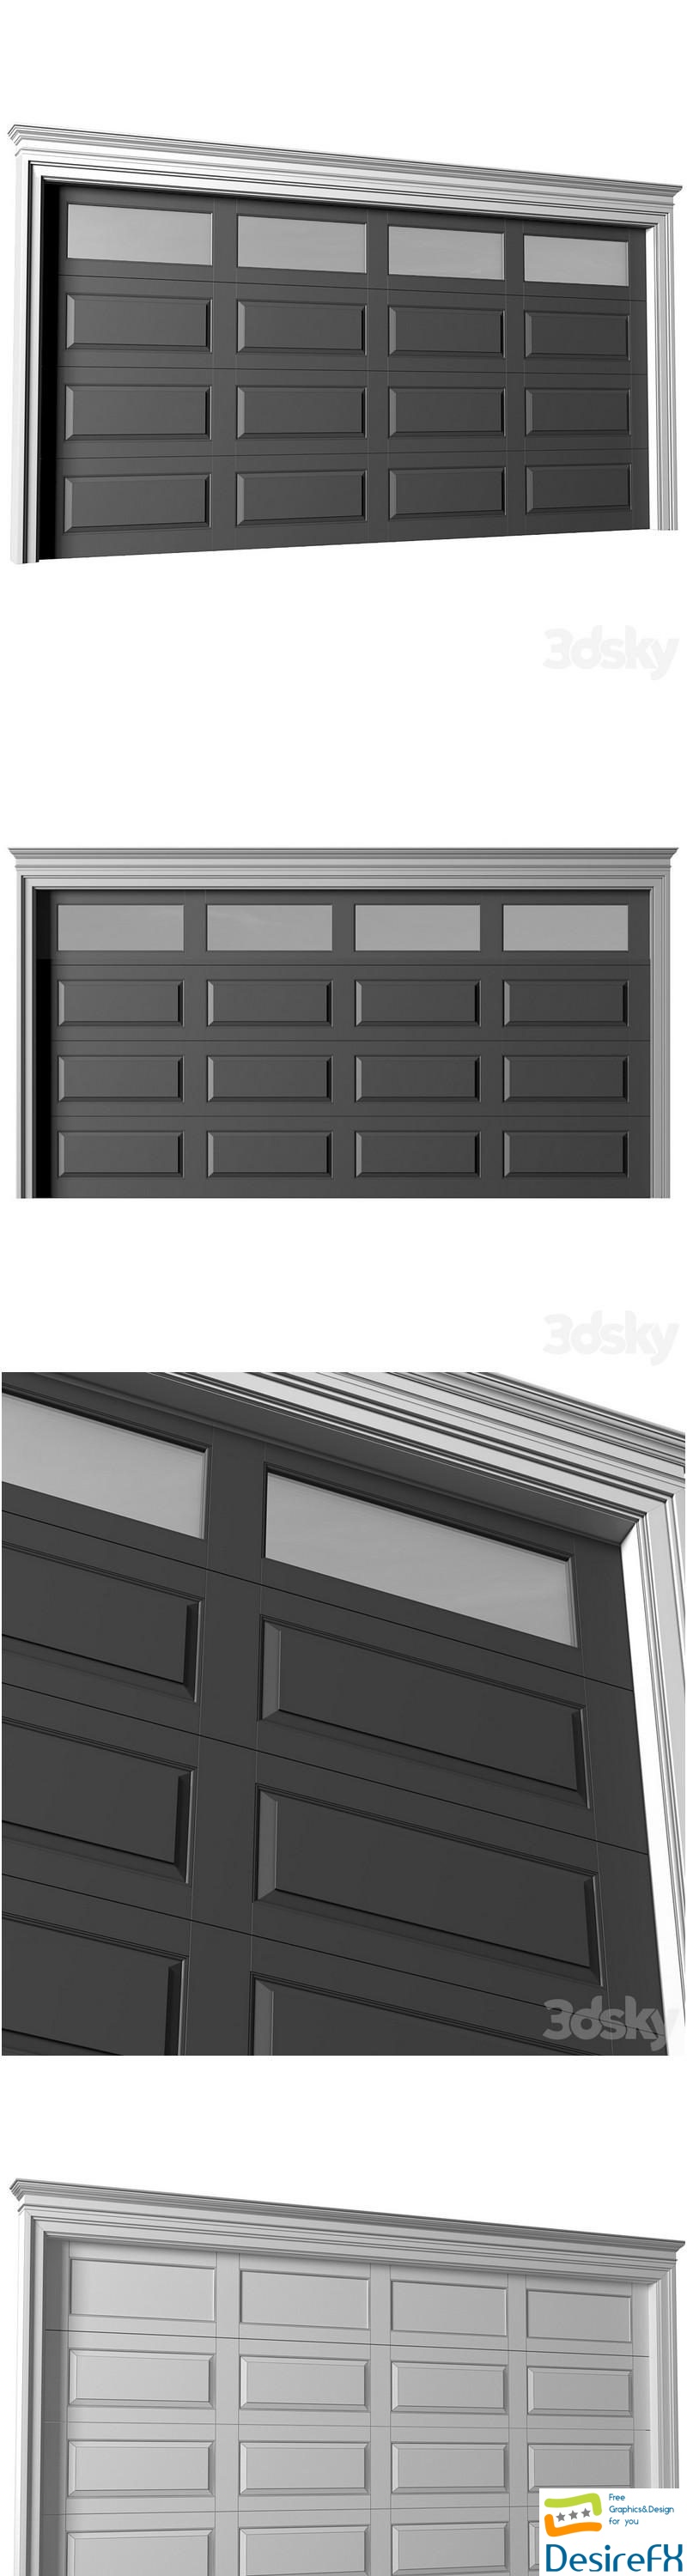 Automatic Garage Doors in classic style.Garage Doors.Traditional Automatic Wood Garage Doors.Entrance modern Gates 3D Model